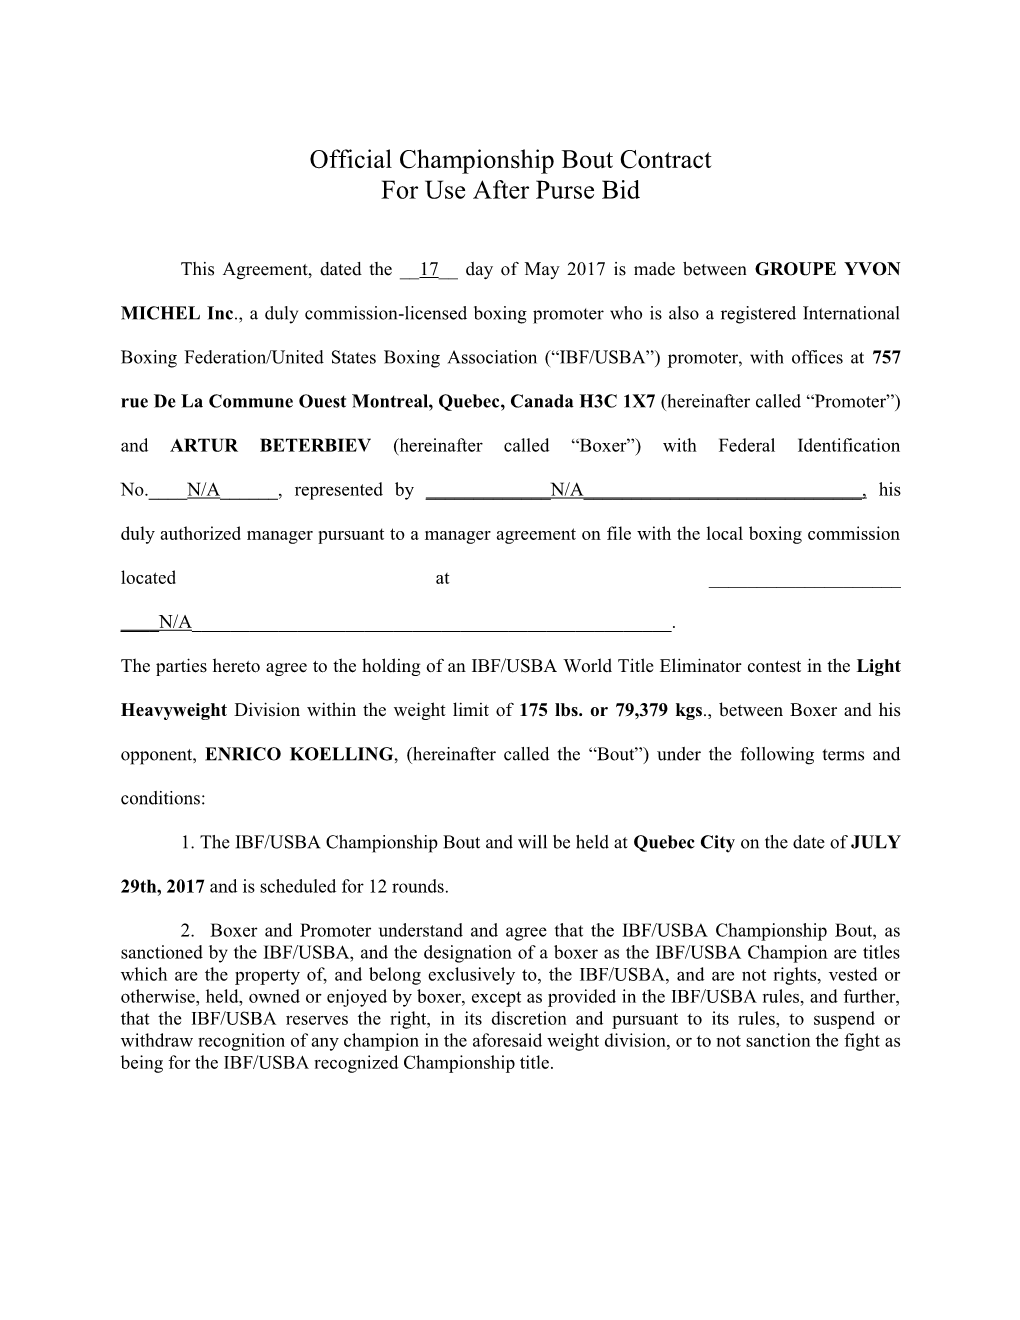 Official Championship Bout Contract for Use After Purse Bid